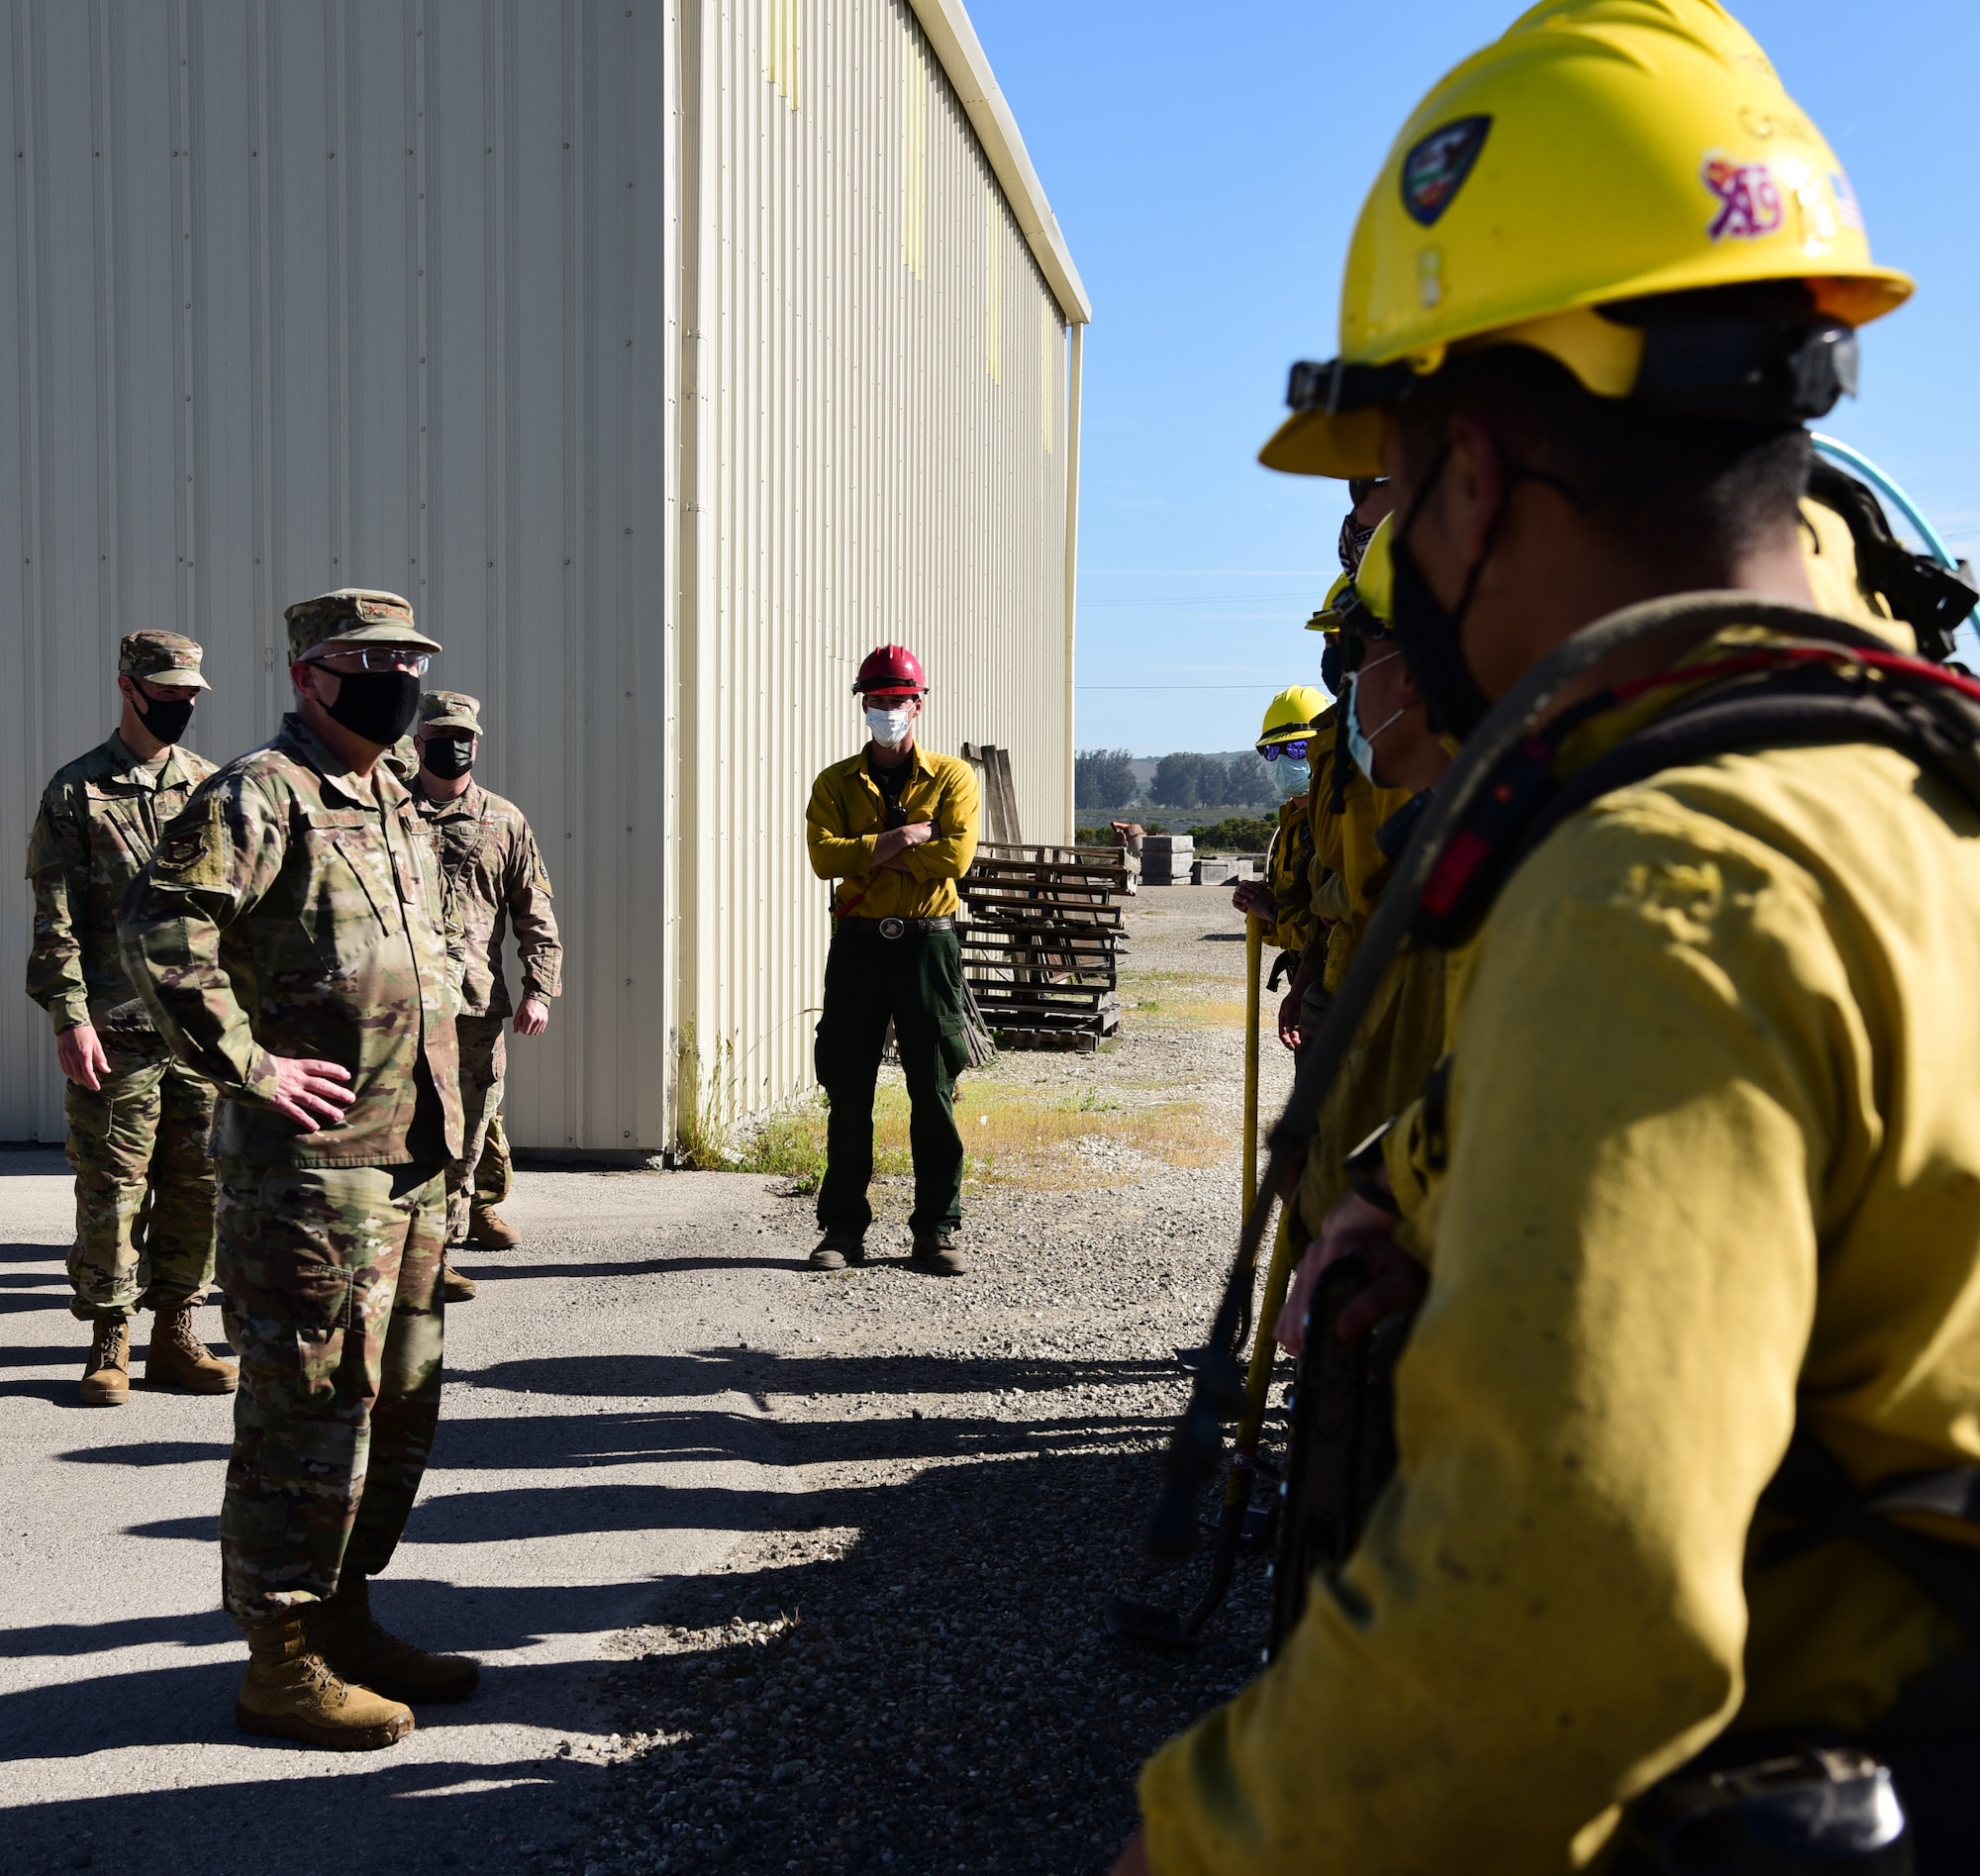 The 30th Space Wing Hotshot firefighters explain how the team extinguishes brush fires to Lt. Gen. John F. Thompson, U.S. Space Force’s Space and Missile Systems Center commander, April 9, 2021, at Vandenberg Air Force Base, Calif. Due to Vandenberg AFB’s location, wildland fires are a common occurrence during the summer months and the Hotshots play a major role in keeping the installation ready and able to continue the mission. (U.S. Space Force photo by Airman 1st Class Rocio Romo)